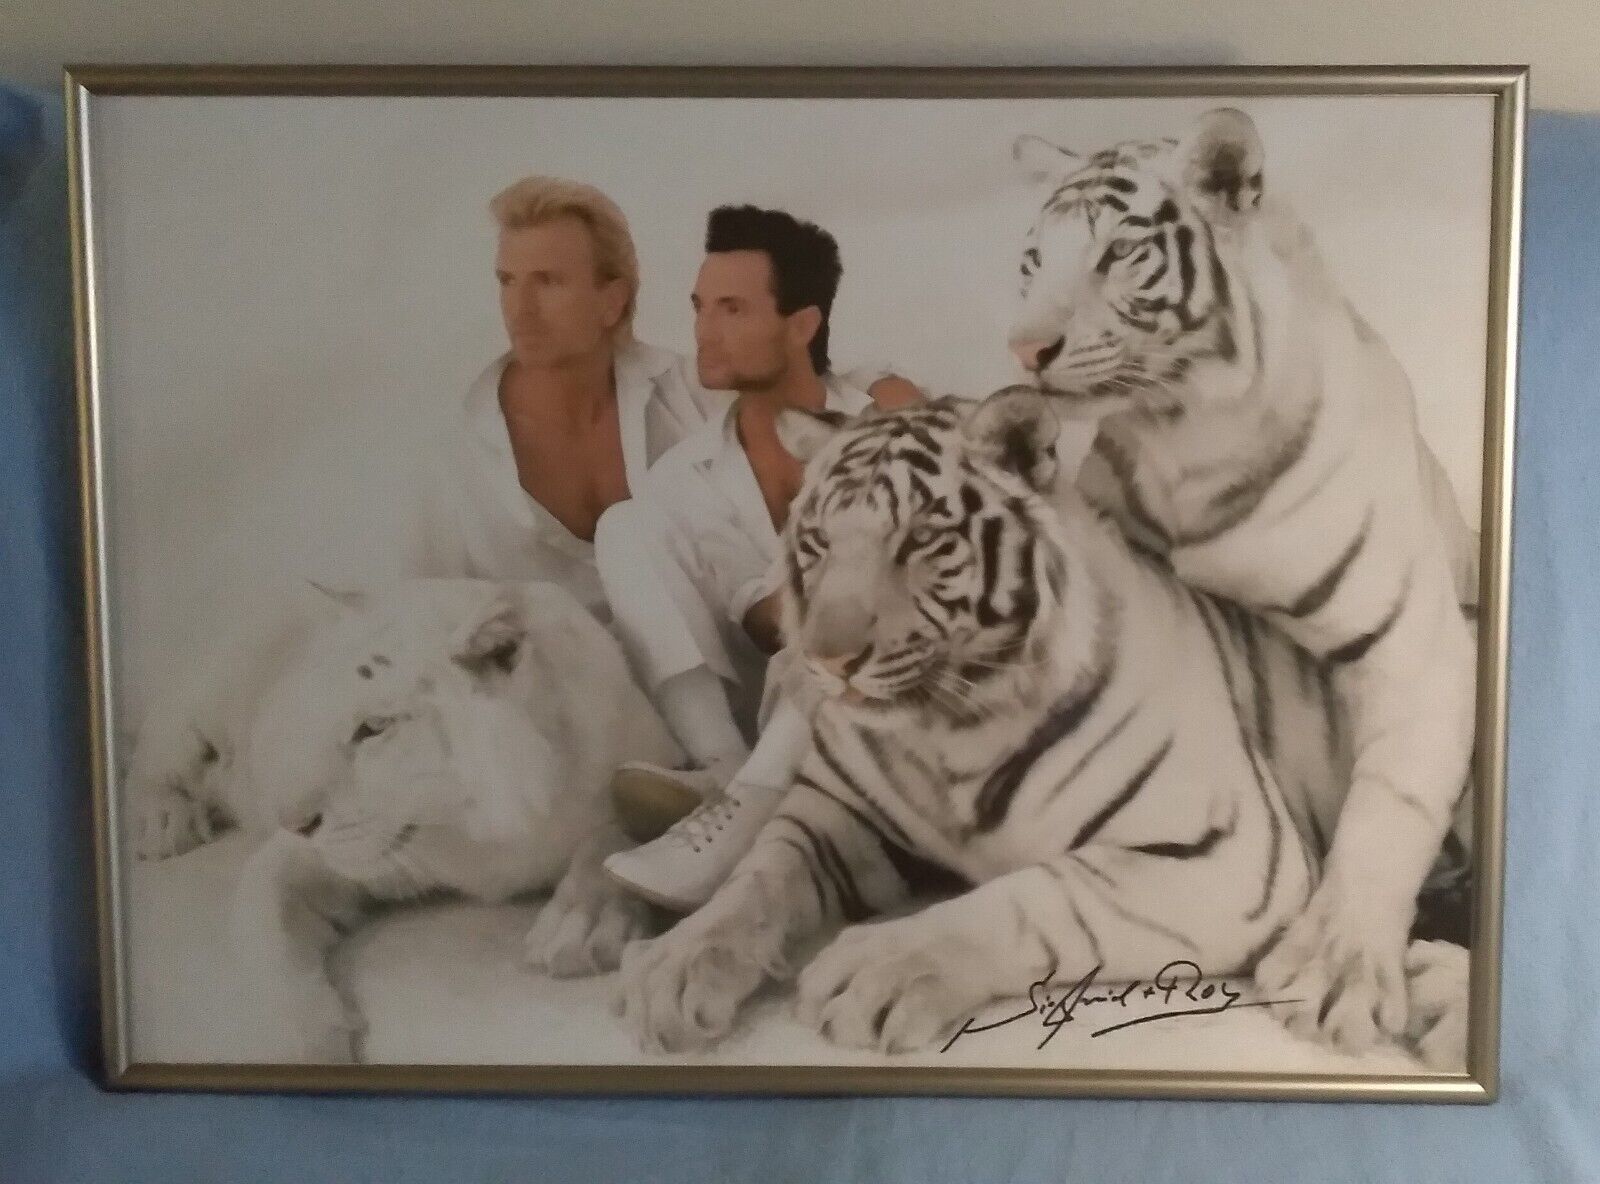 2001 FRAMED SIEGFRIED AND ROY LITHO/POSTER ~White Tigers~Mirage Casino Las Vegas